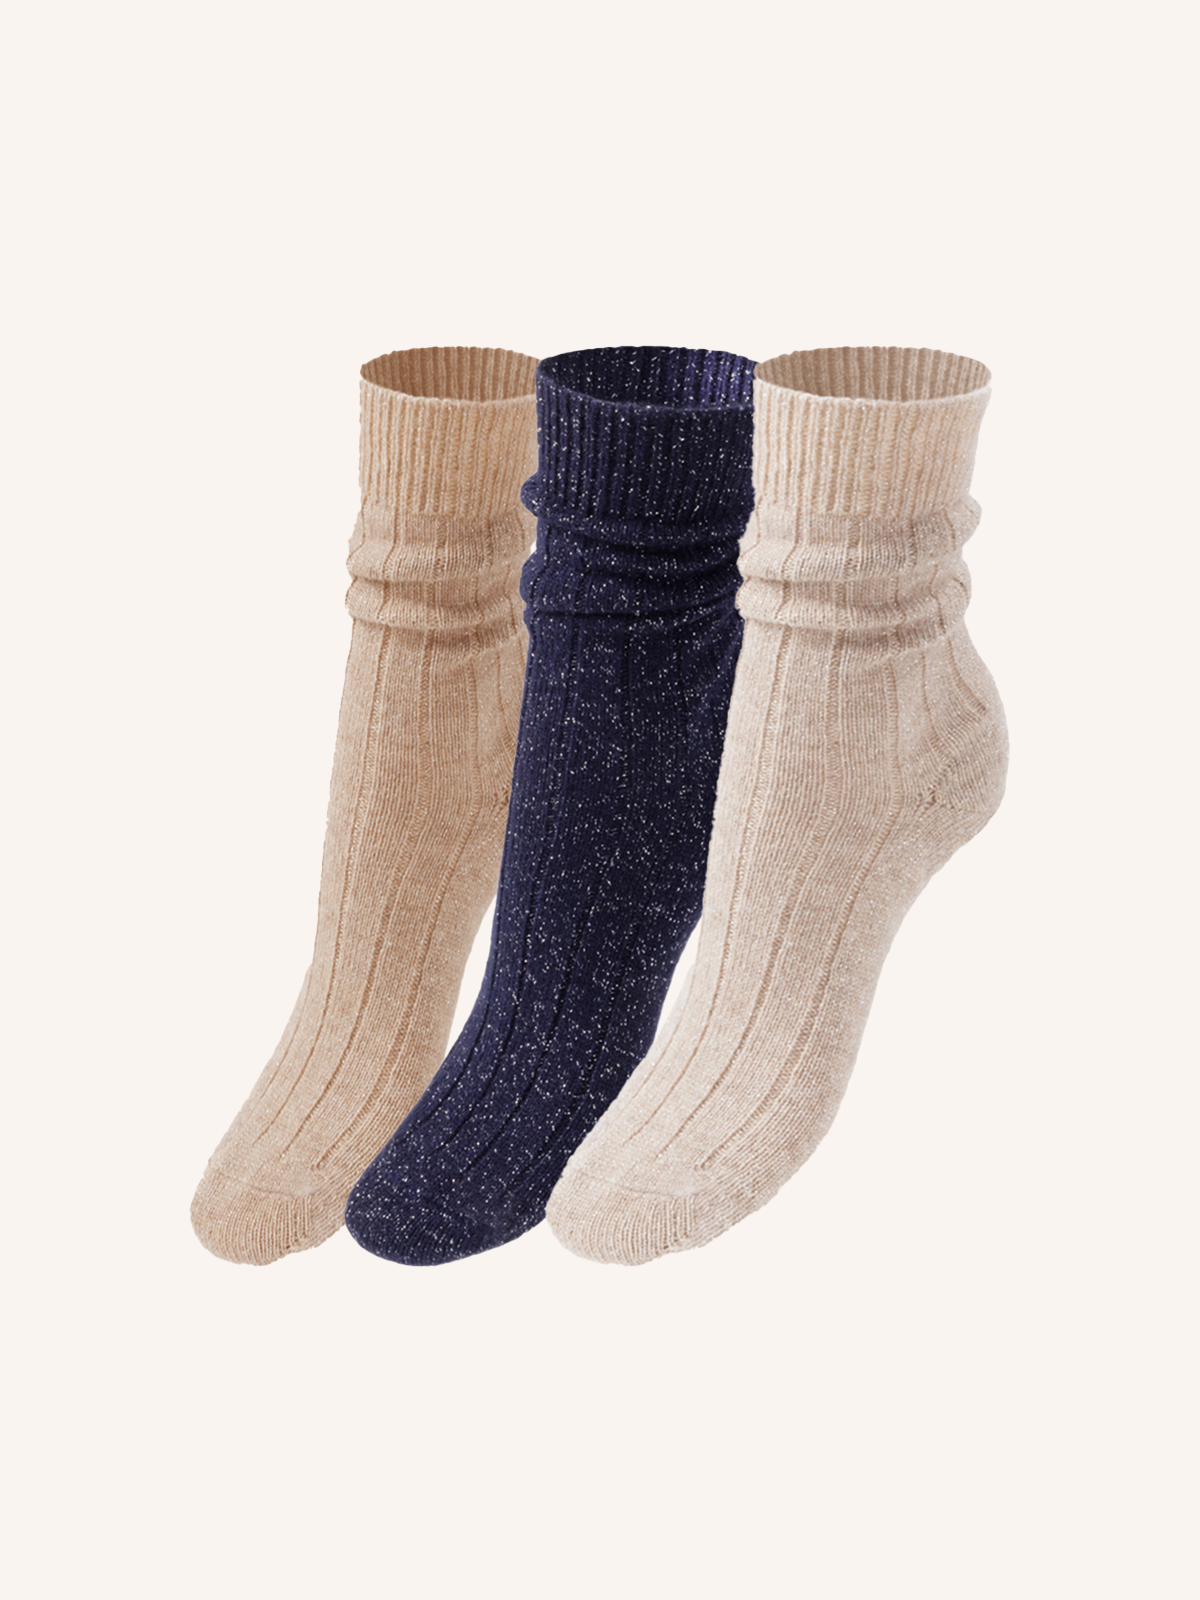 Short Socks in Cashmere and Lurex for Women | Plain Color | Pack of 3 Pairs | Cashlux D